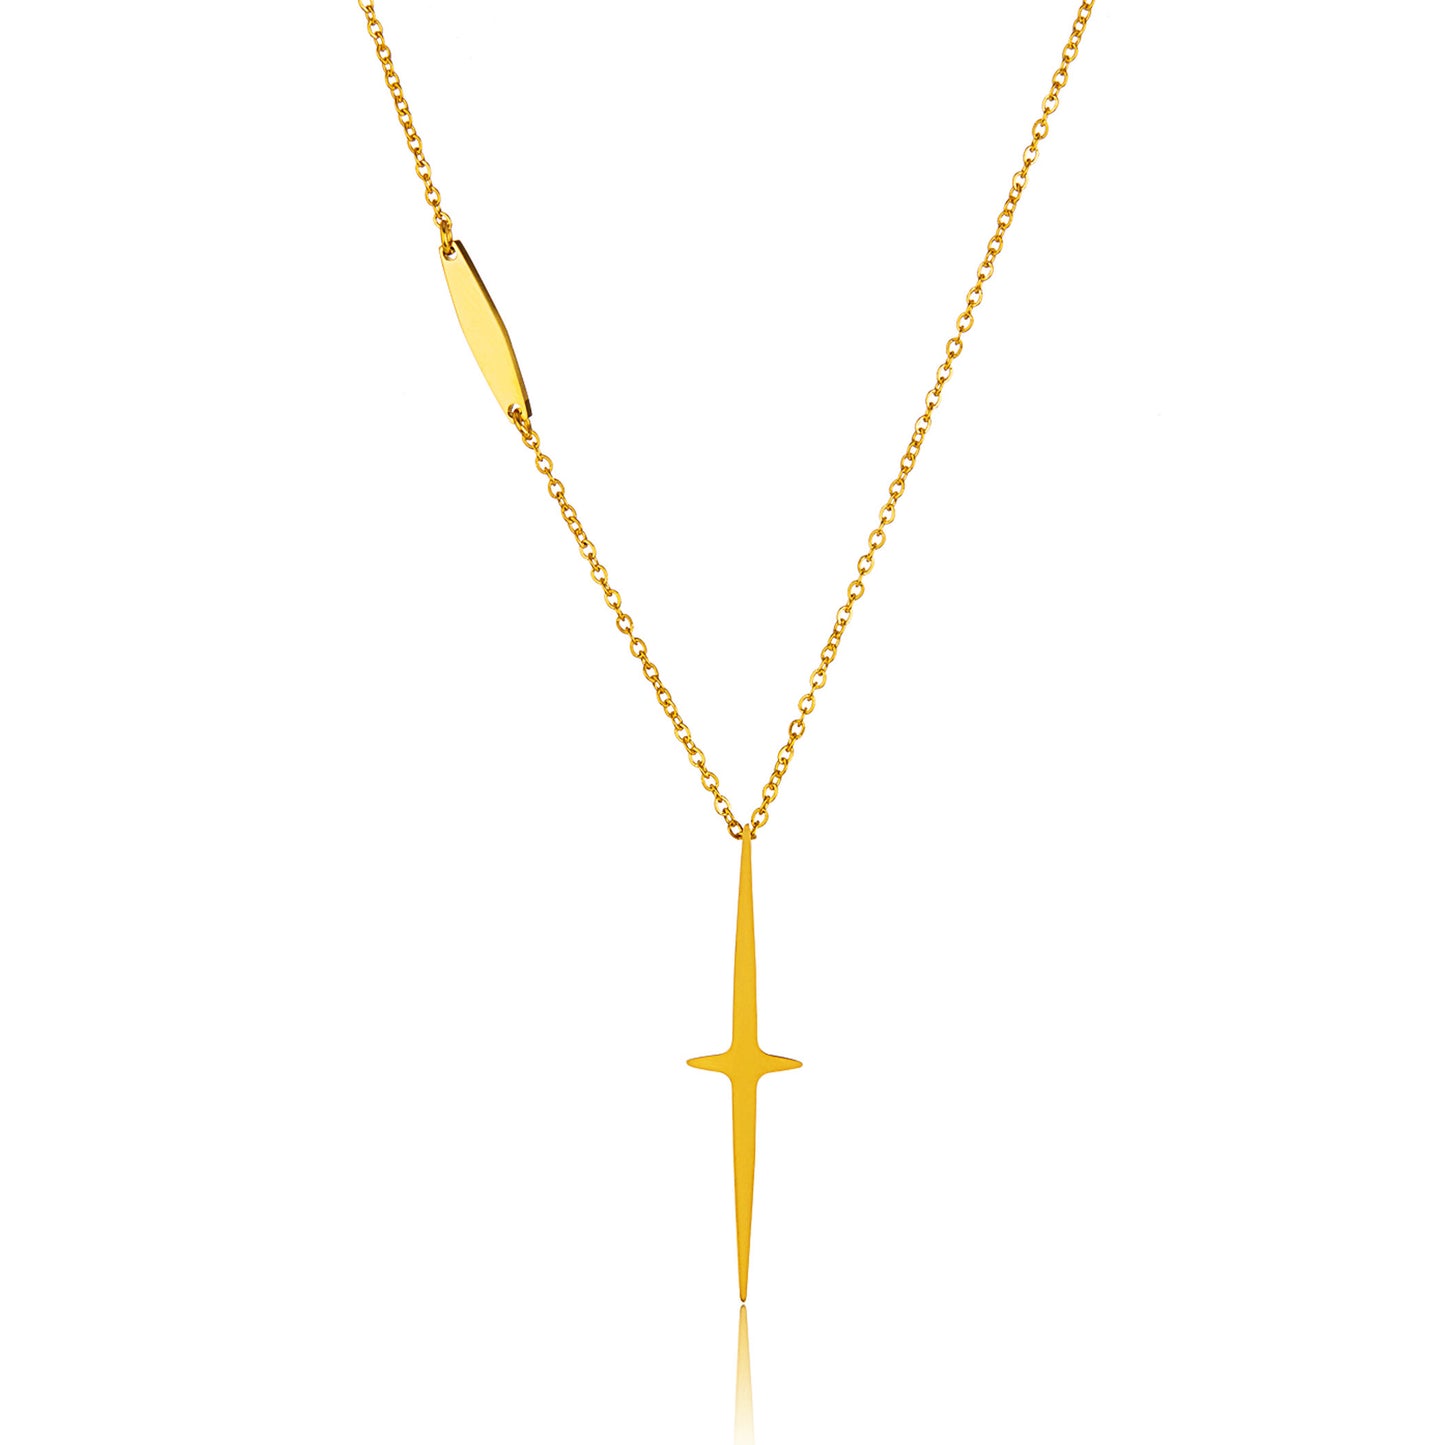 ELYA Gold Plated Star Cross Stainless Steel Cable Chain Pendant Necklace - 17"